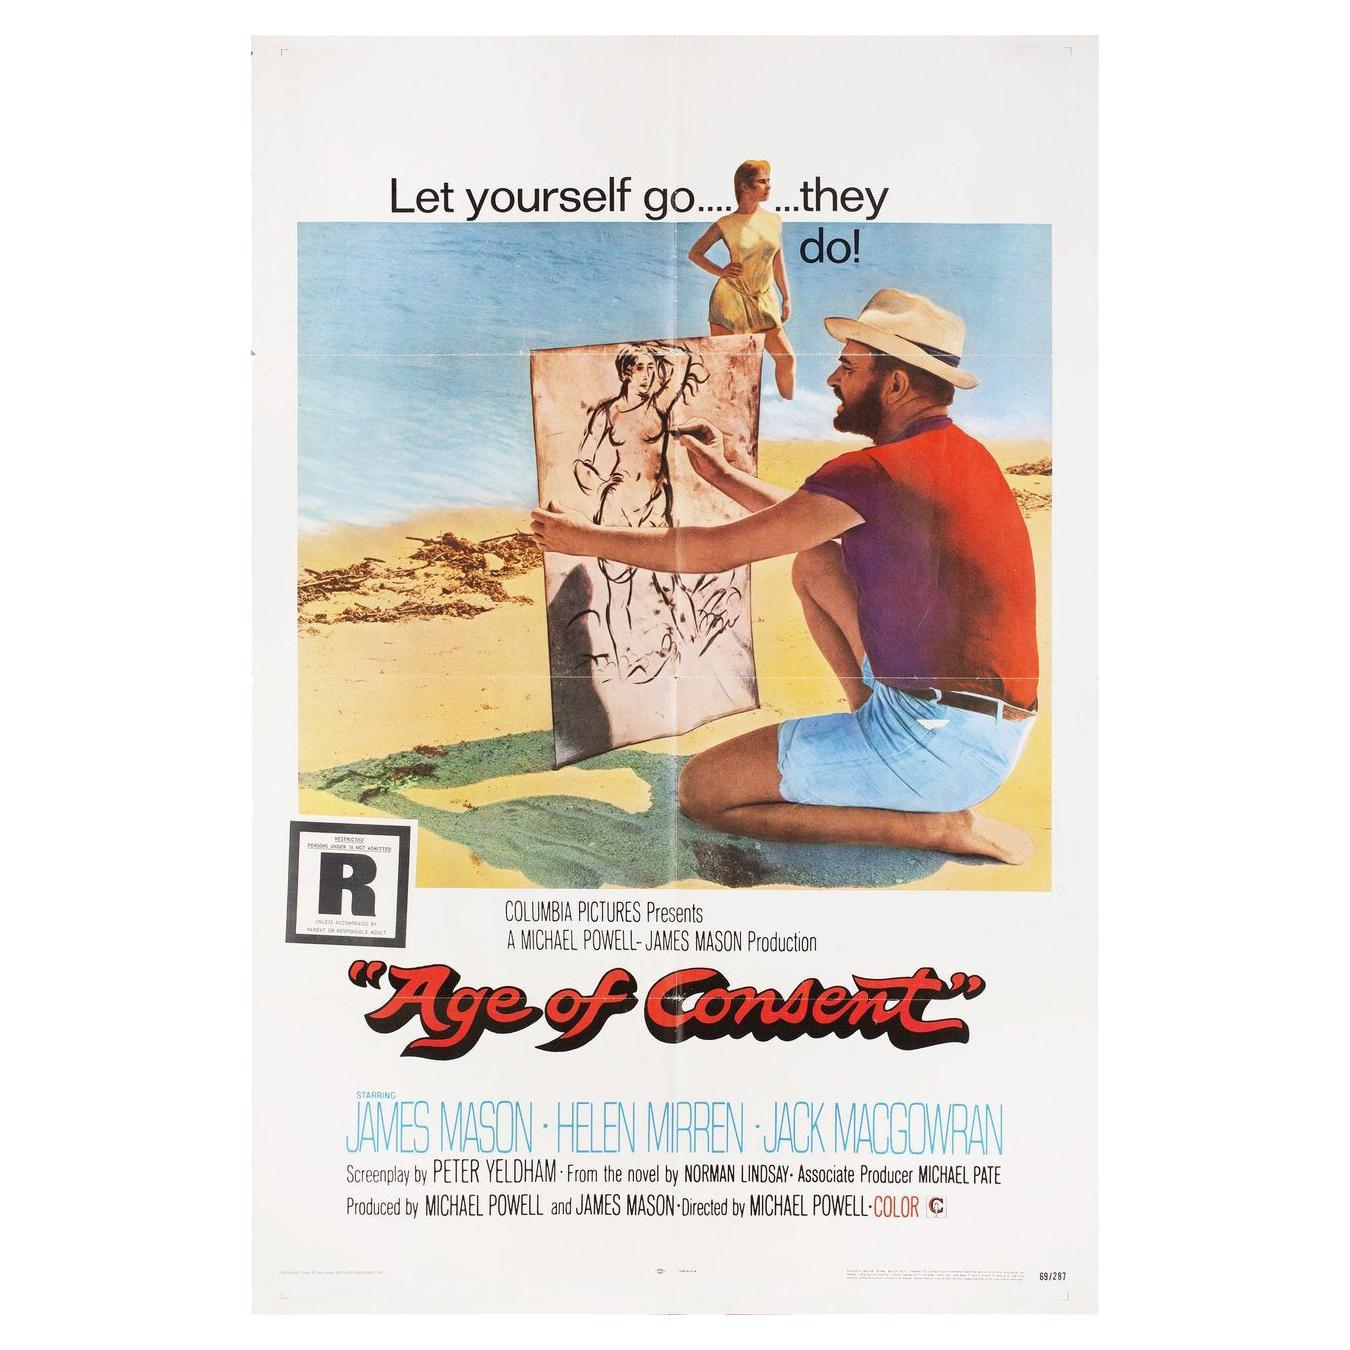 'Age of Consent' 1969 U.S. One Sheet Film Poster For Sale